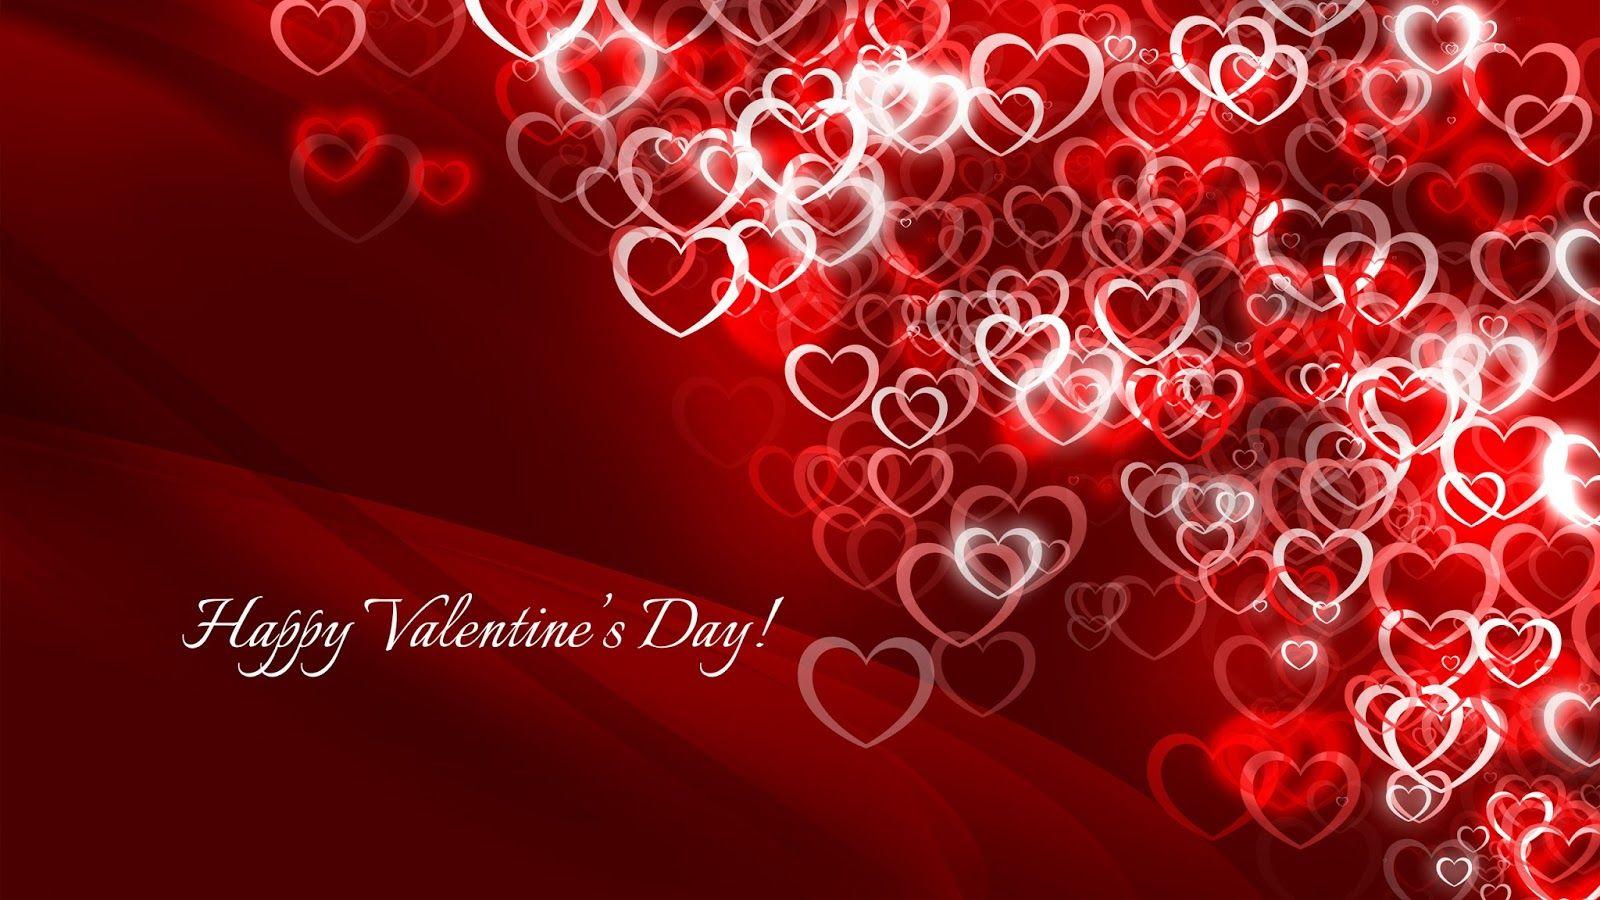 Happy Valentine's Day HD Image Picture and Wallpaper